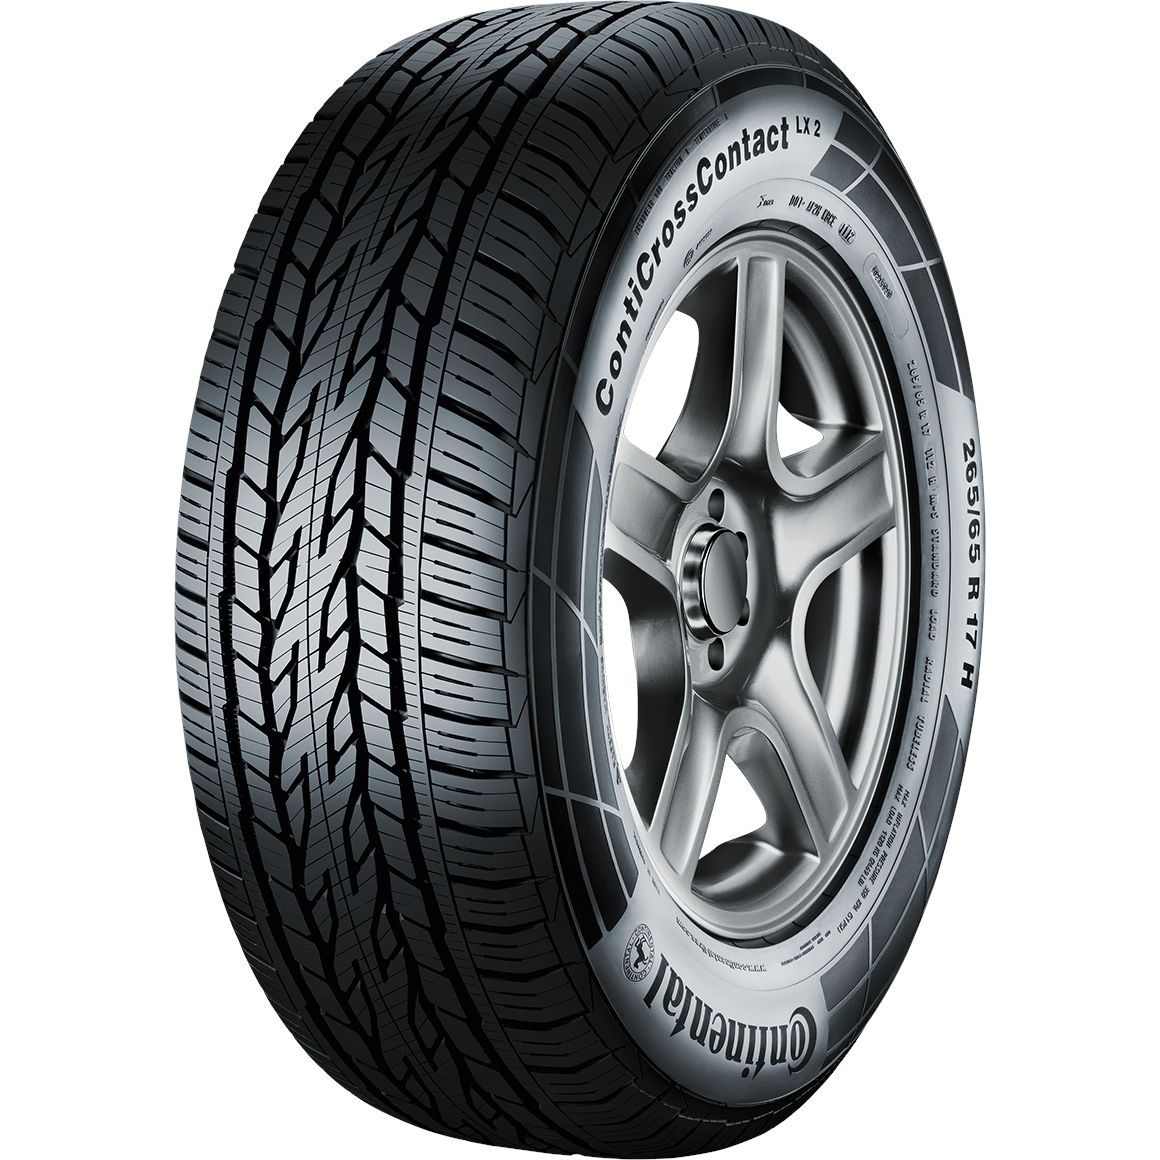 Continental 235/70R16 106H ContiCrossContact™ LX 2 DOT21